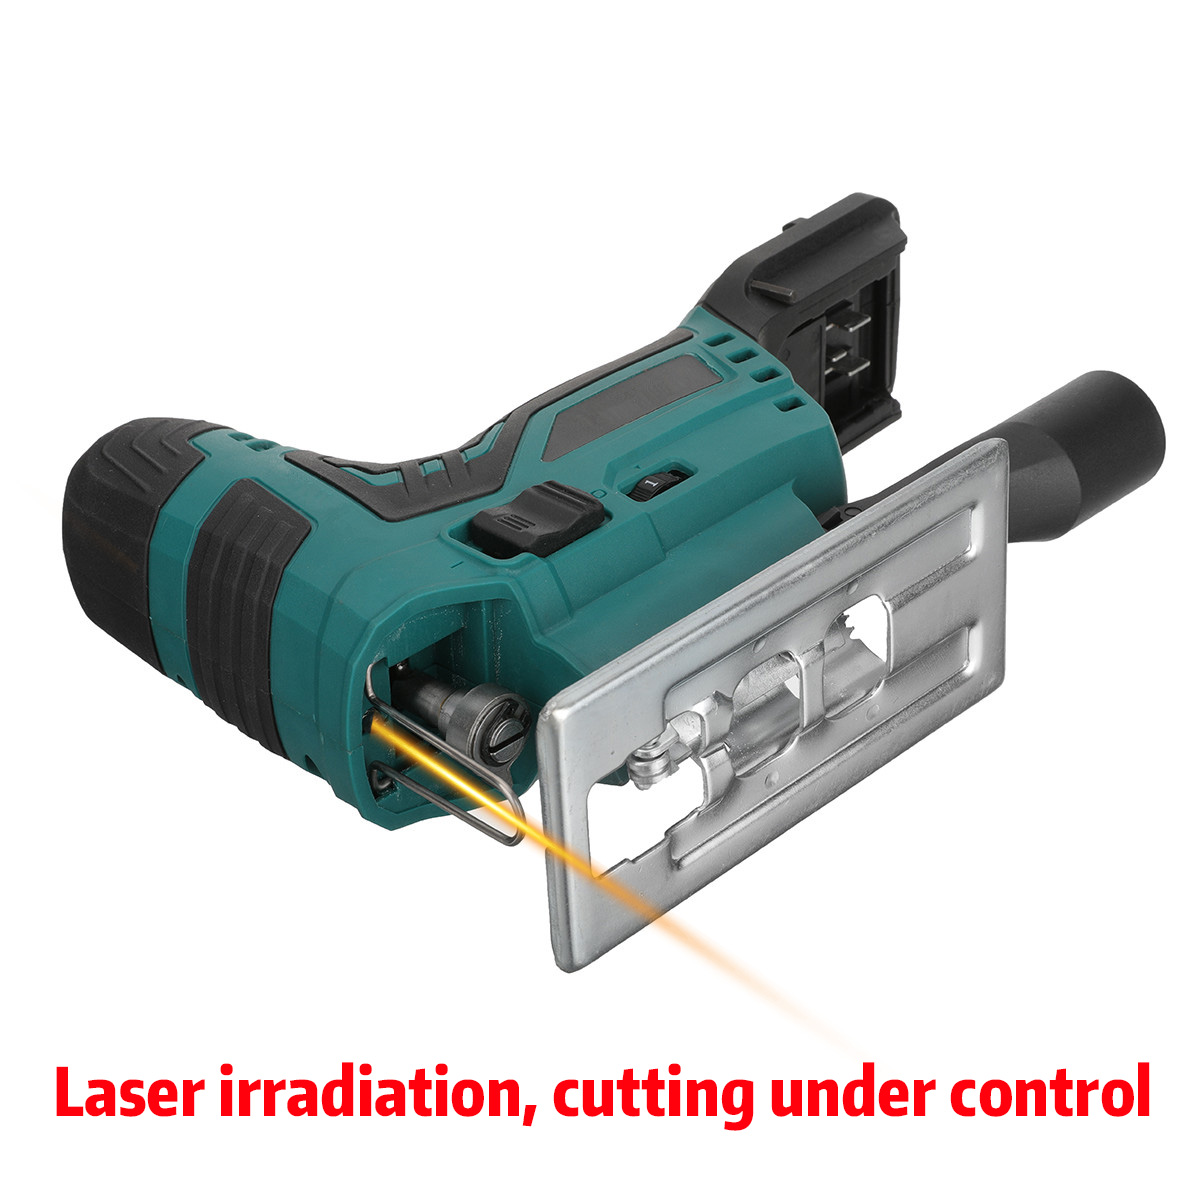 Drillpro-6-Speeds-55mm-2400RPM-Cordless-Jigsaw-Electric-Jig-Saw-Multi-function-Woodworking-Power-Too-1937968-8